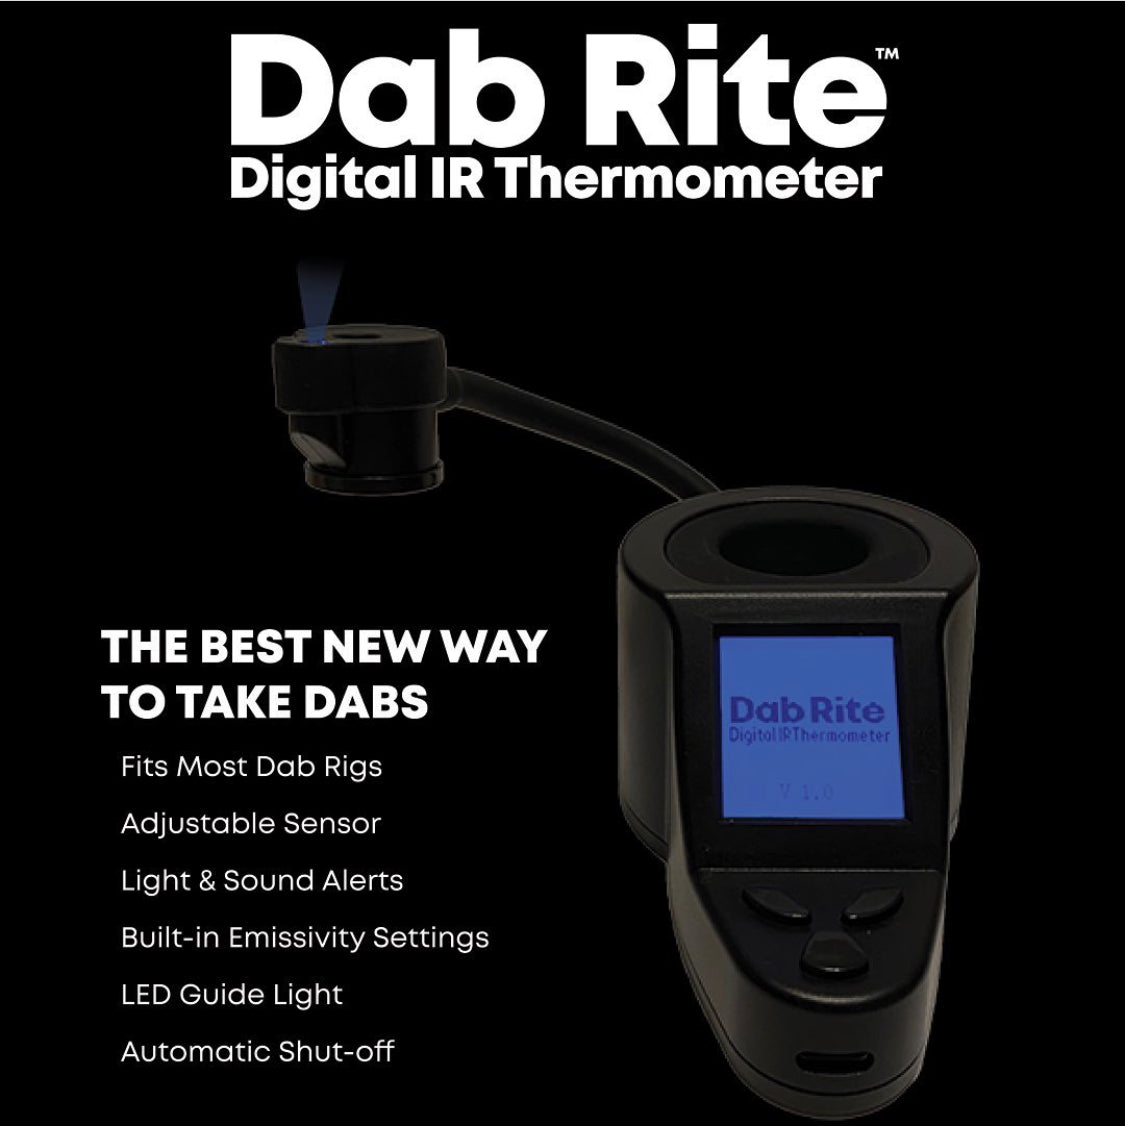 The Dab Rite™ Digital Infrared Thermometer Official Retailer at